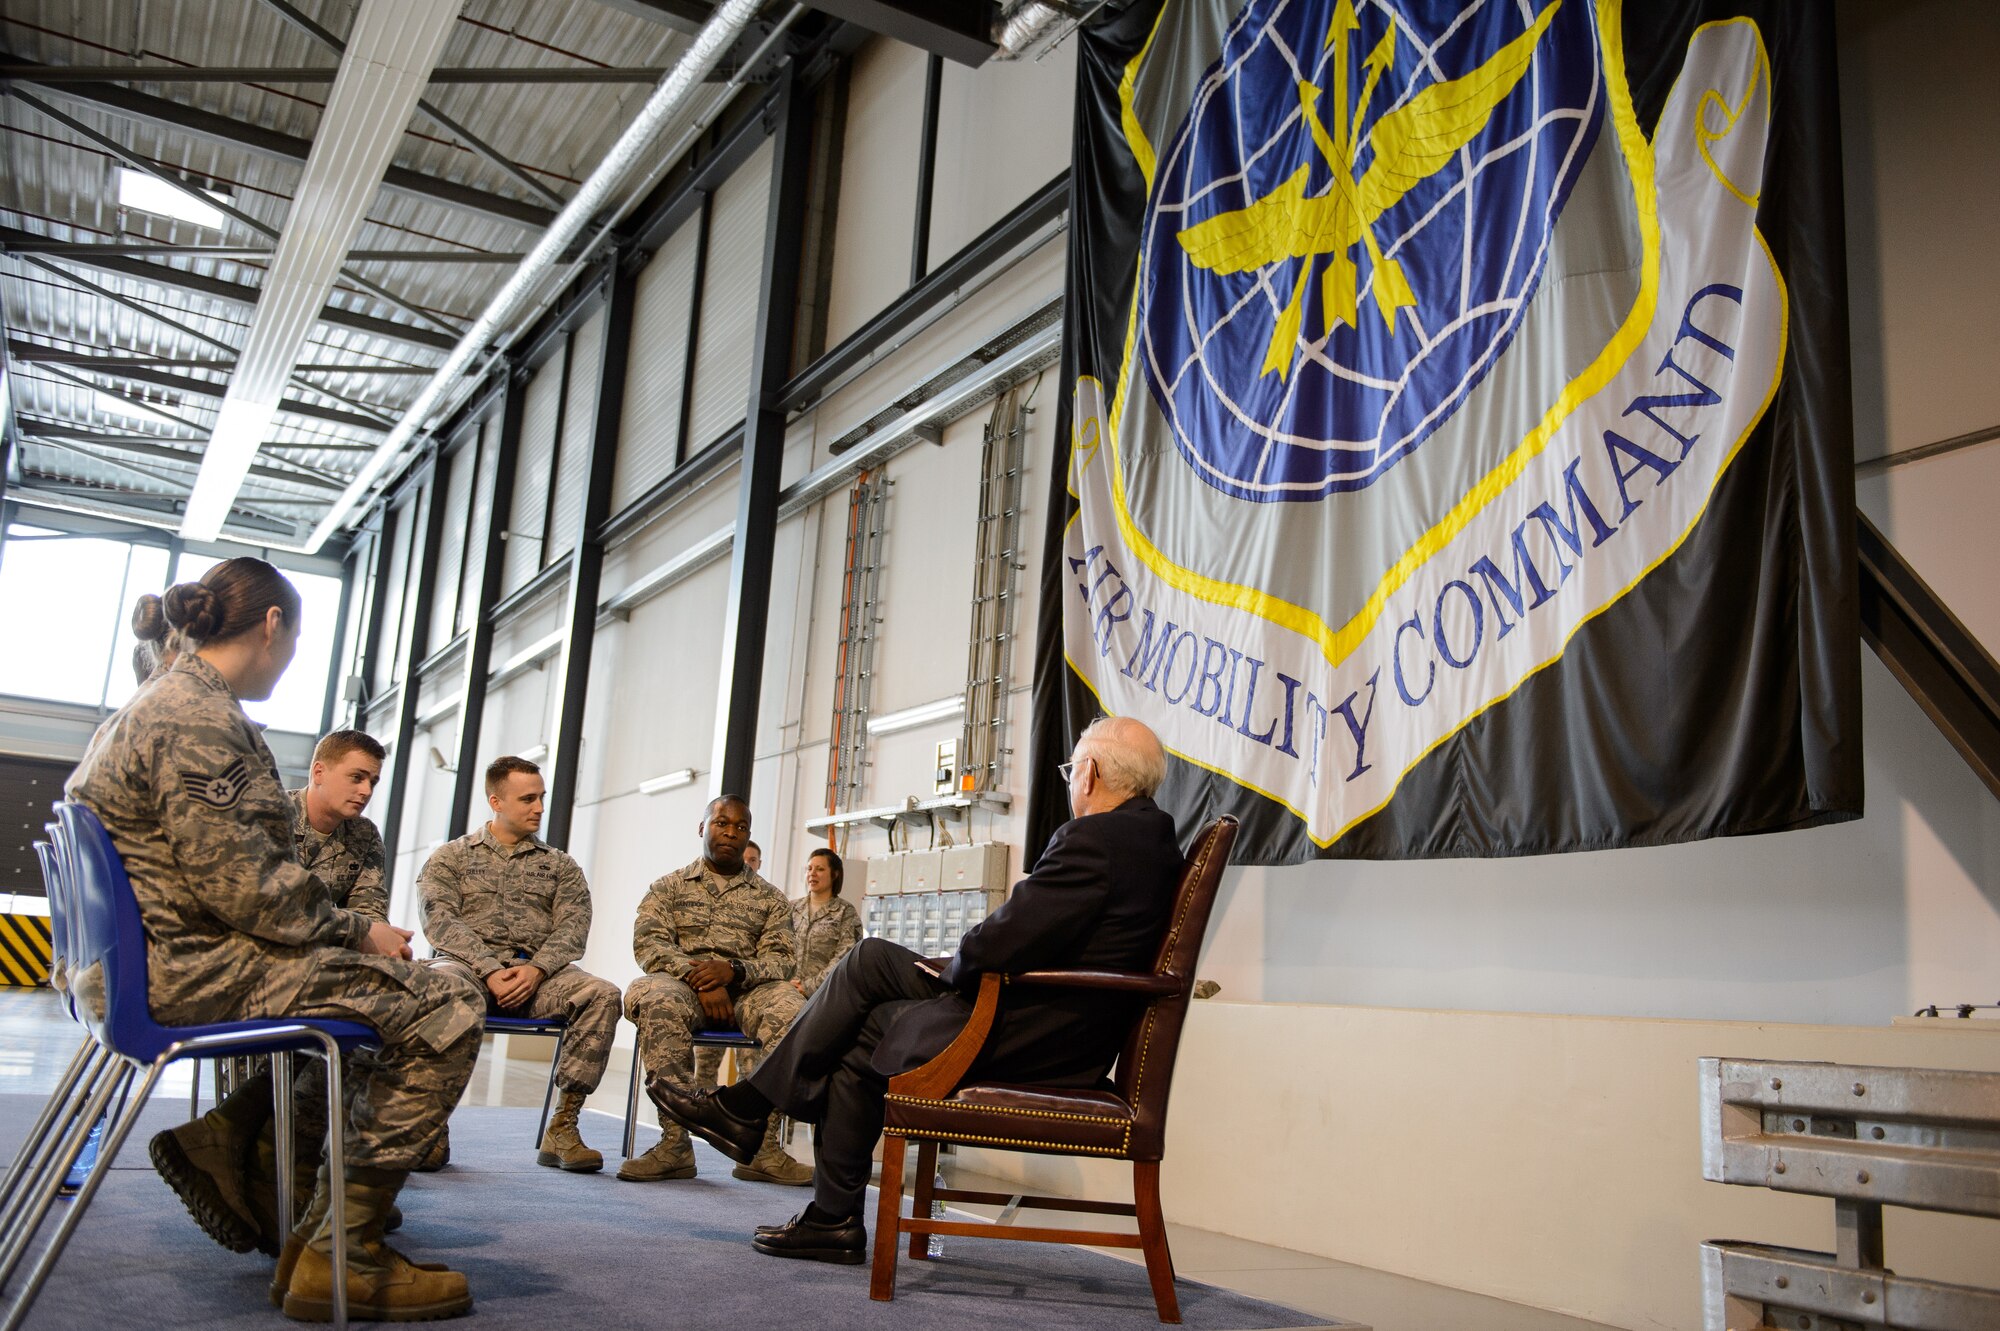 Airmen from the 521st Air Mobility Operations Wing brief Sam E. Parish, retired Chief Master Sergeant of the Air Force, on their missions Jan. 27, 2016, at Ramstein Air Base, Germany. Airmen from the 521st Air Mobility Operations Wing had an opportunity to meet Parish and discuss the differences from when Parish enlisted and the current Air Force. Parish was the guest speaker at a variety of venues including Airman Leadership School, squadron all calls, and the chief induction ceremony as part of his visit. (U.S. Air Force photo/Staff Sgt. Armando A. Schwier-Morales)